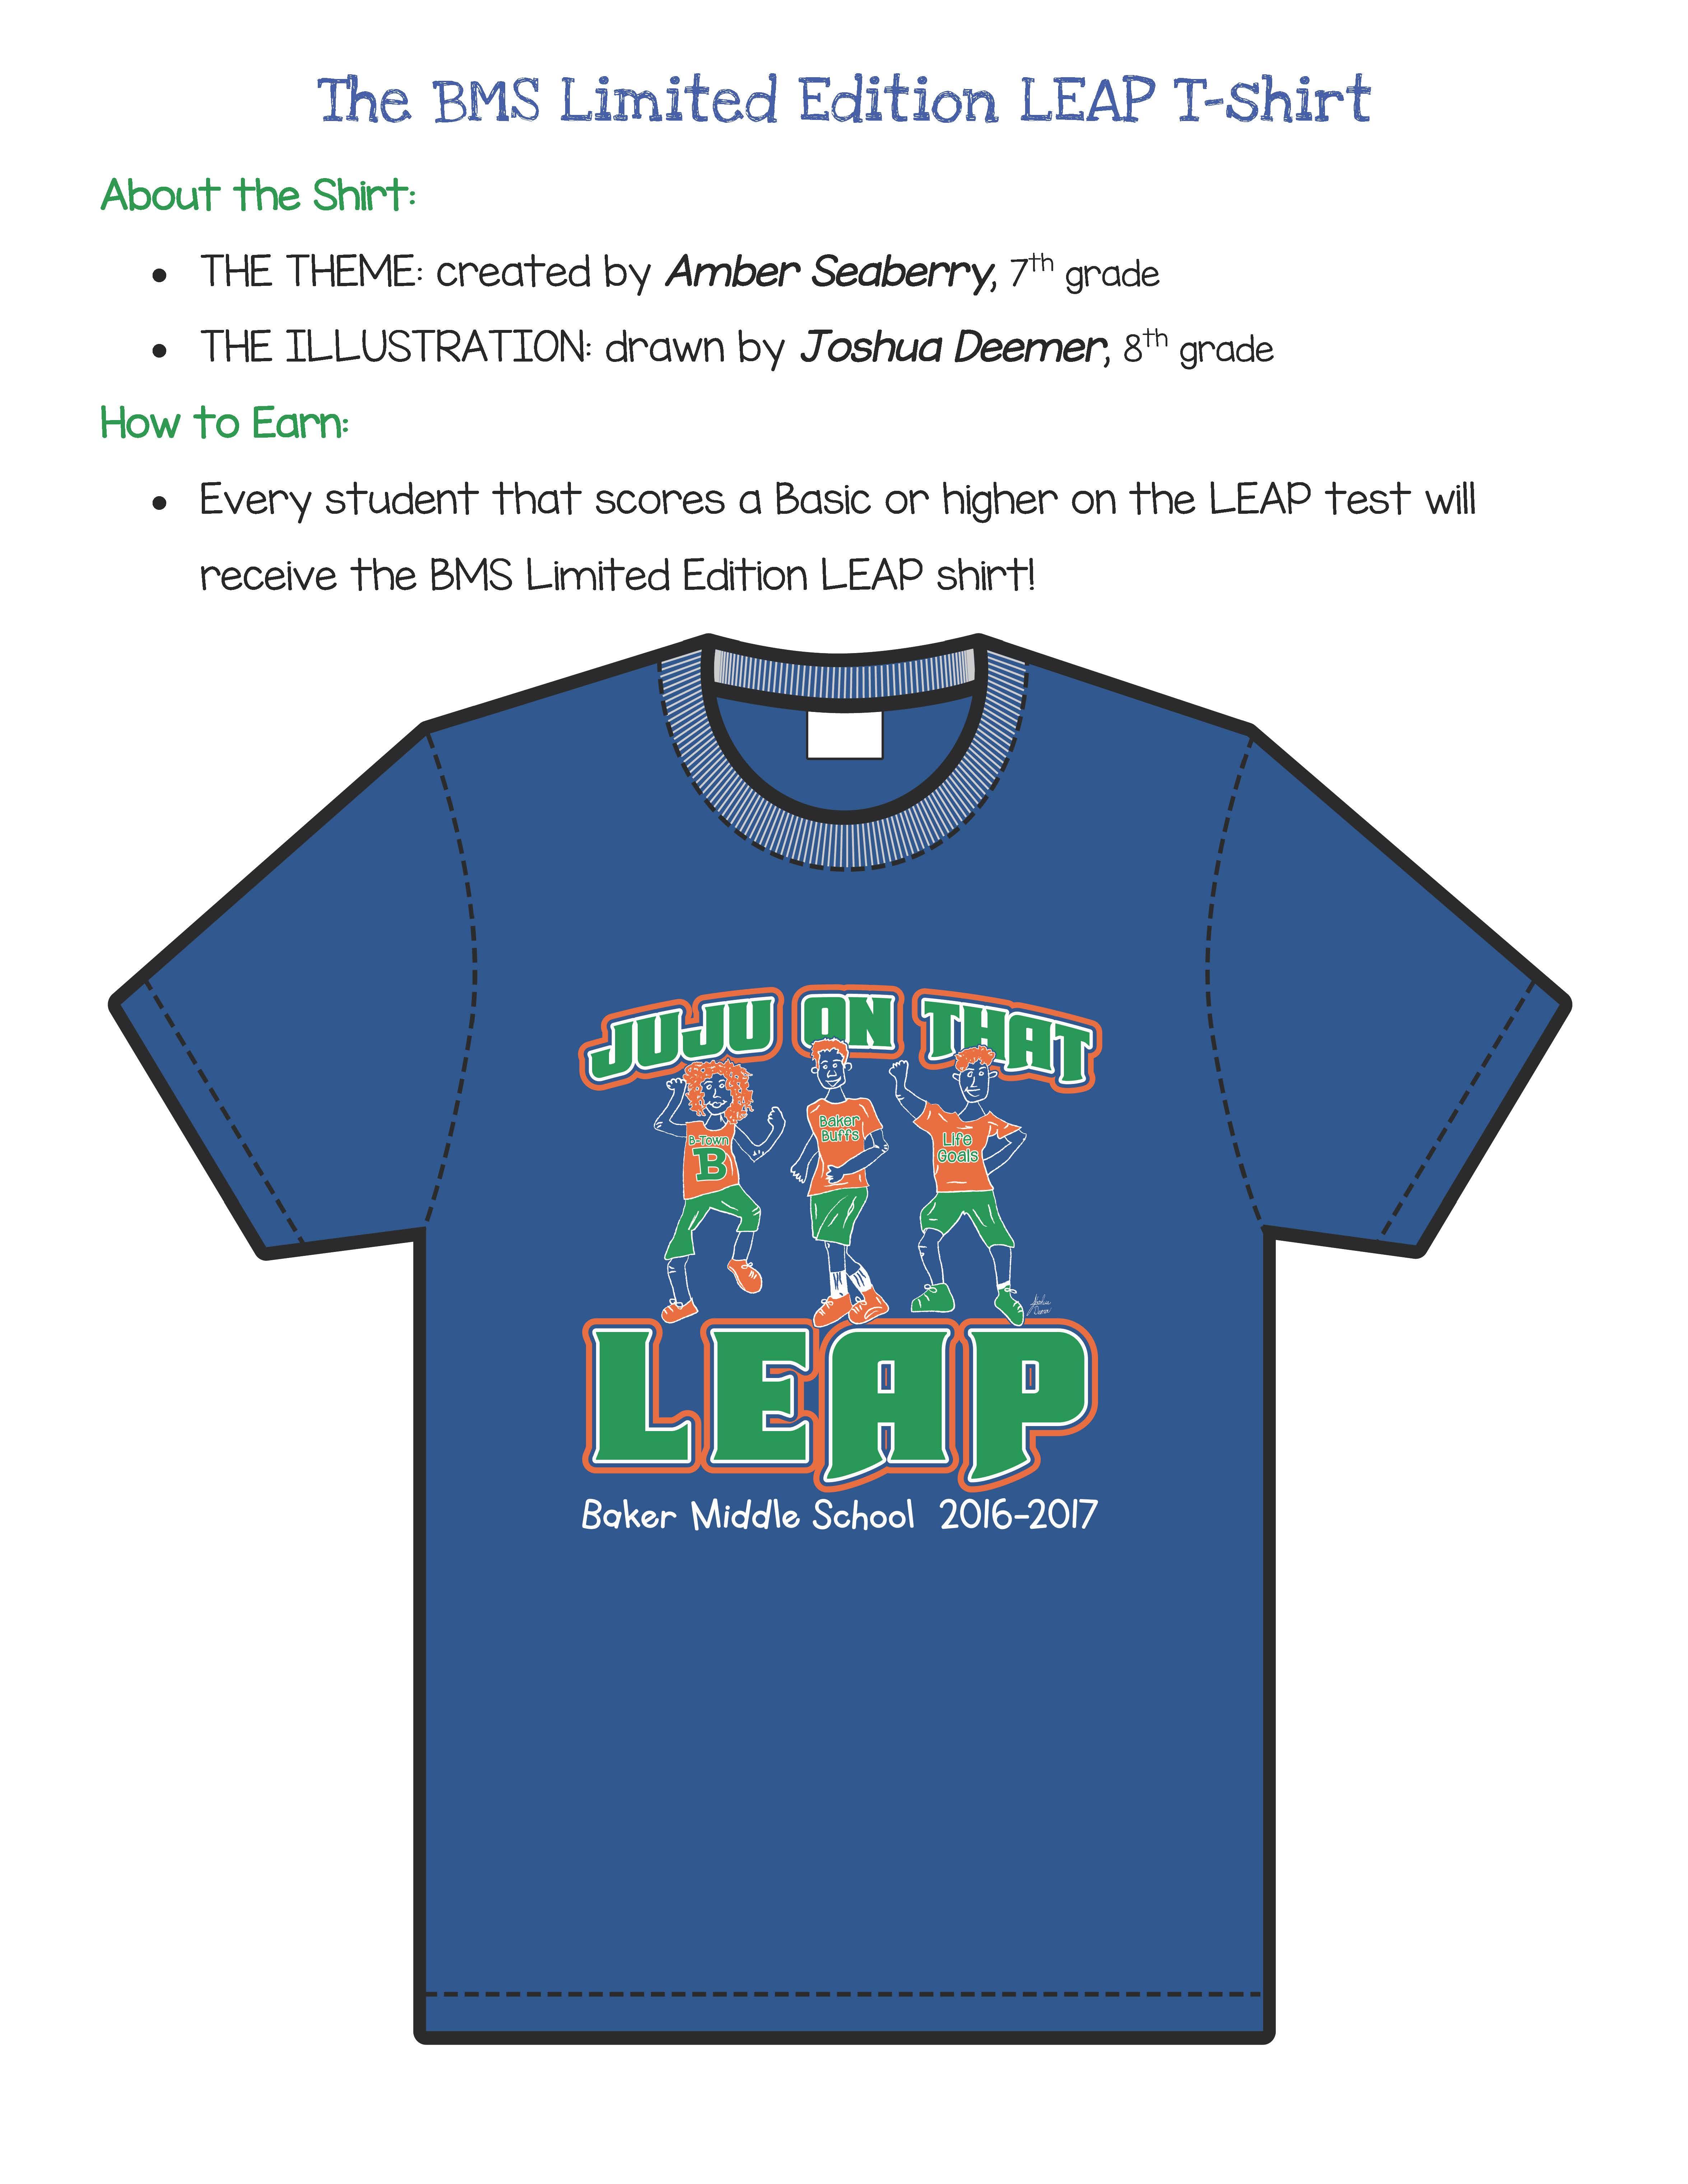 Baker Middle LEAP TShirt Contest Results in Graphic